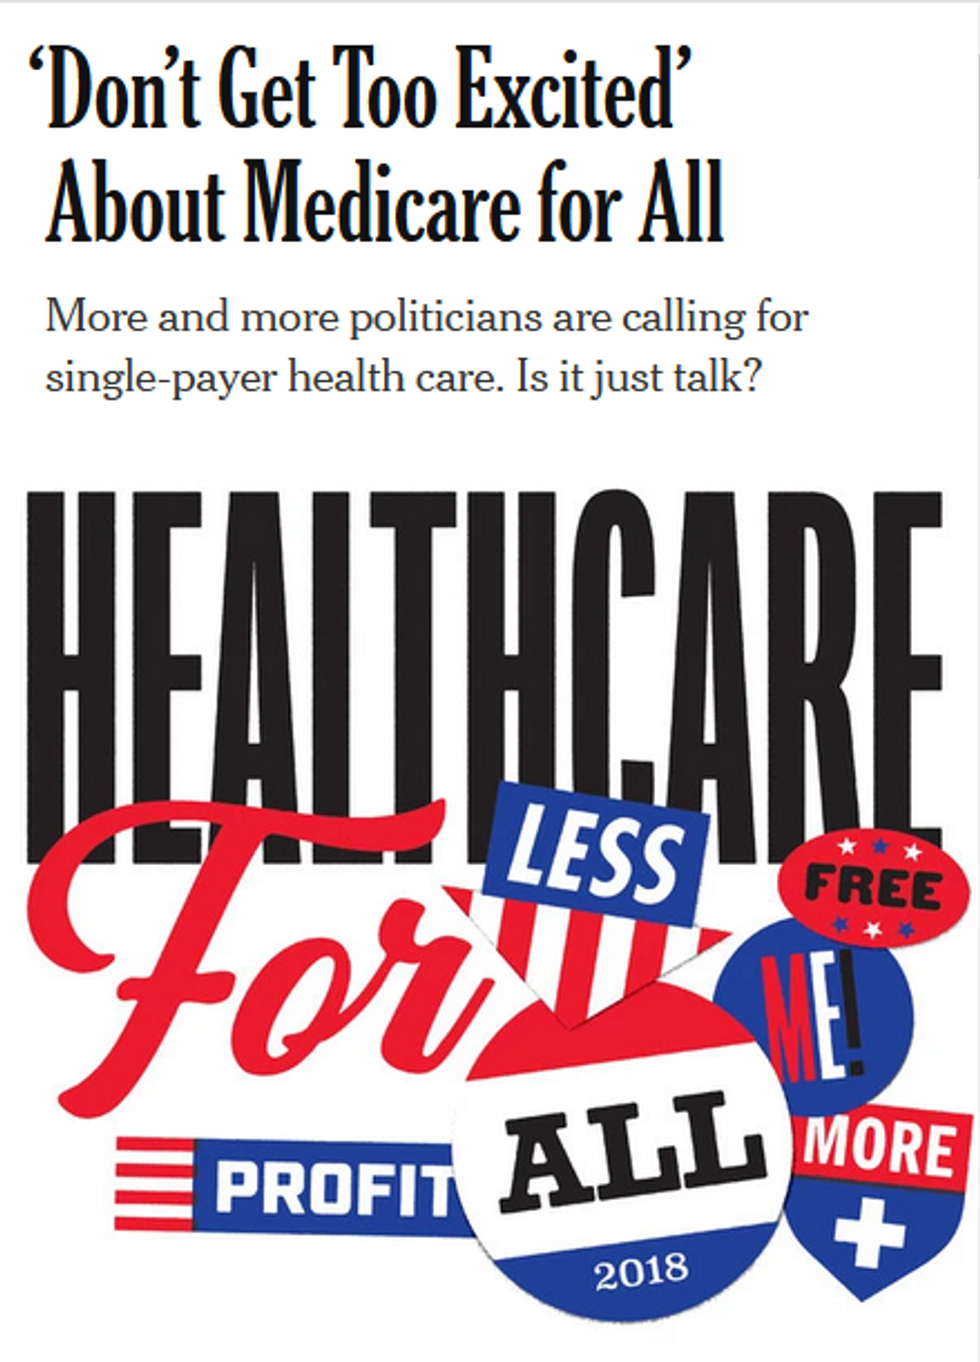 NYT: 'Don't Get Too Excited' About Medicare for All